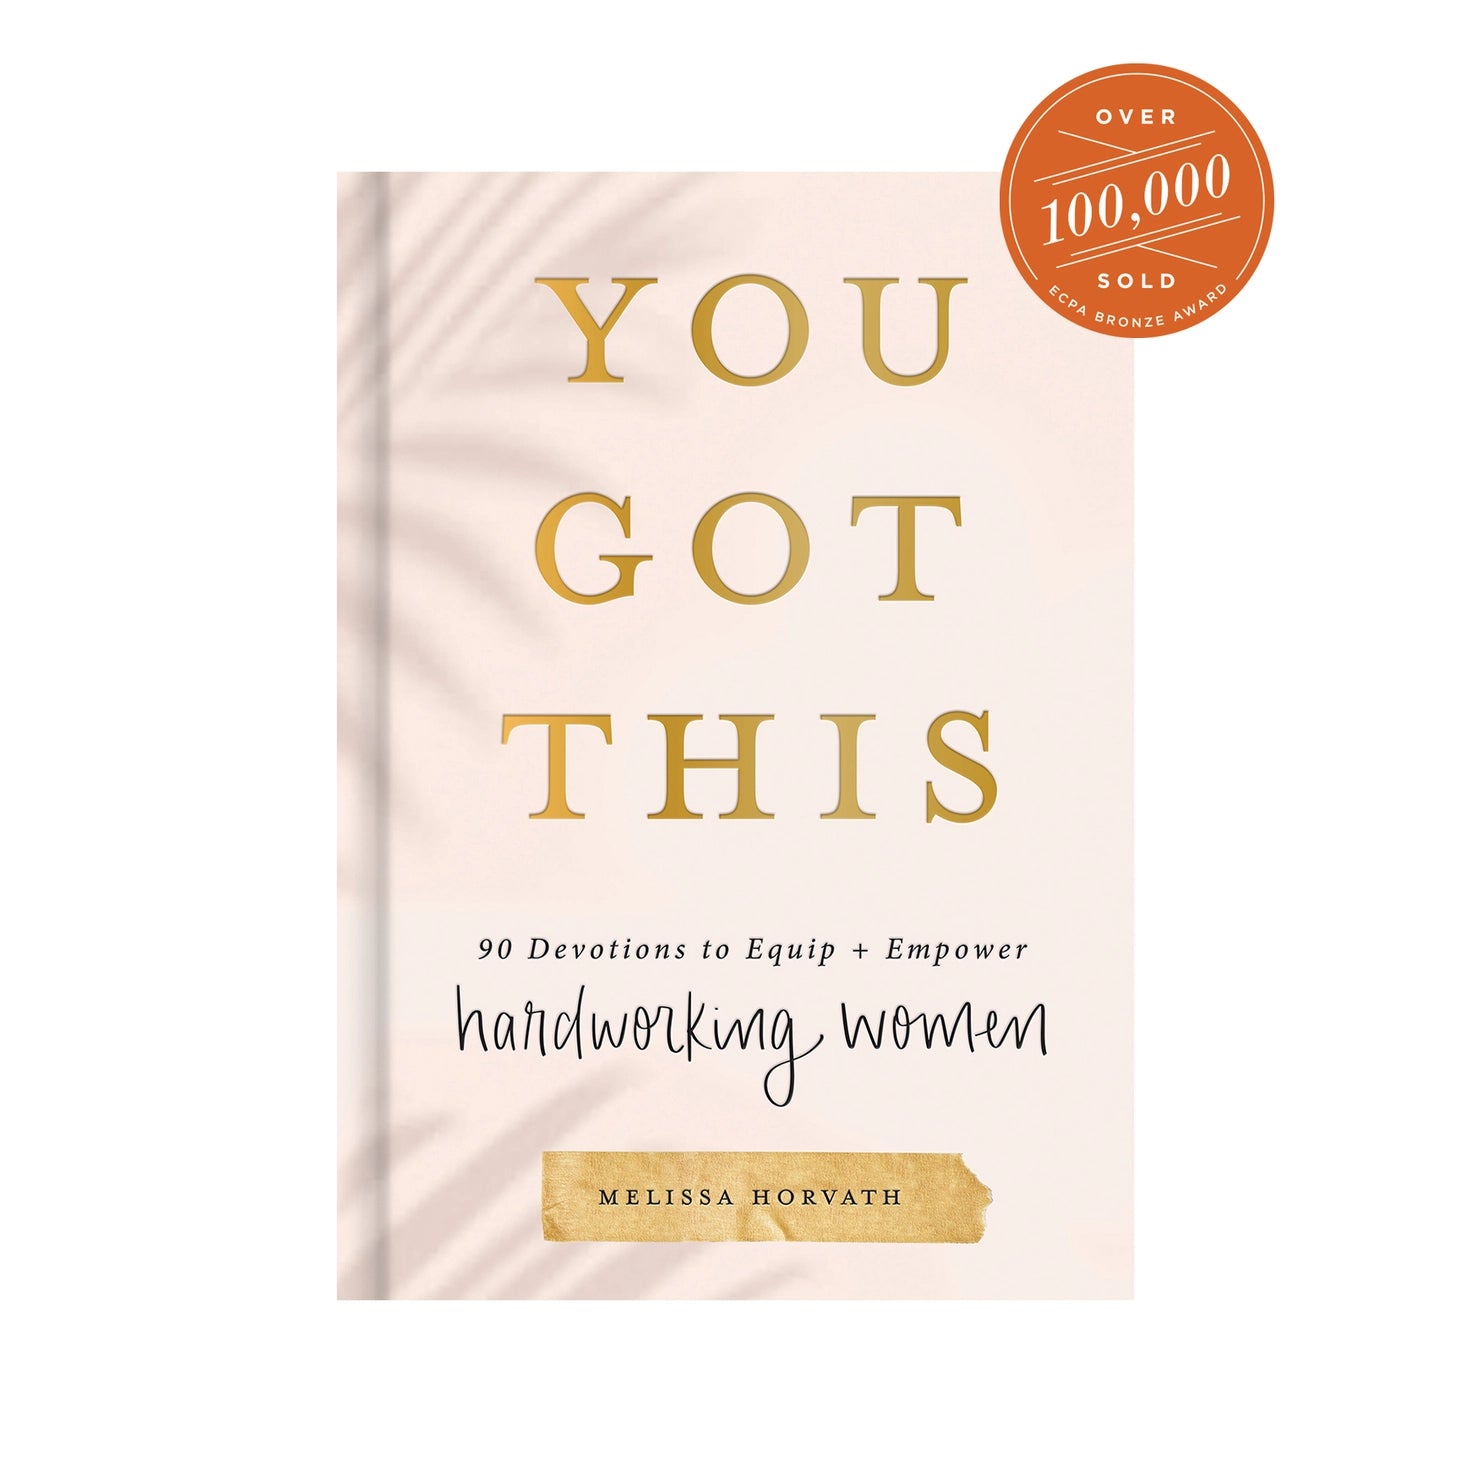 You Got this: 90 Devotions to Equip and Empower Hardworking Women